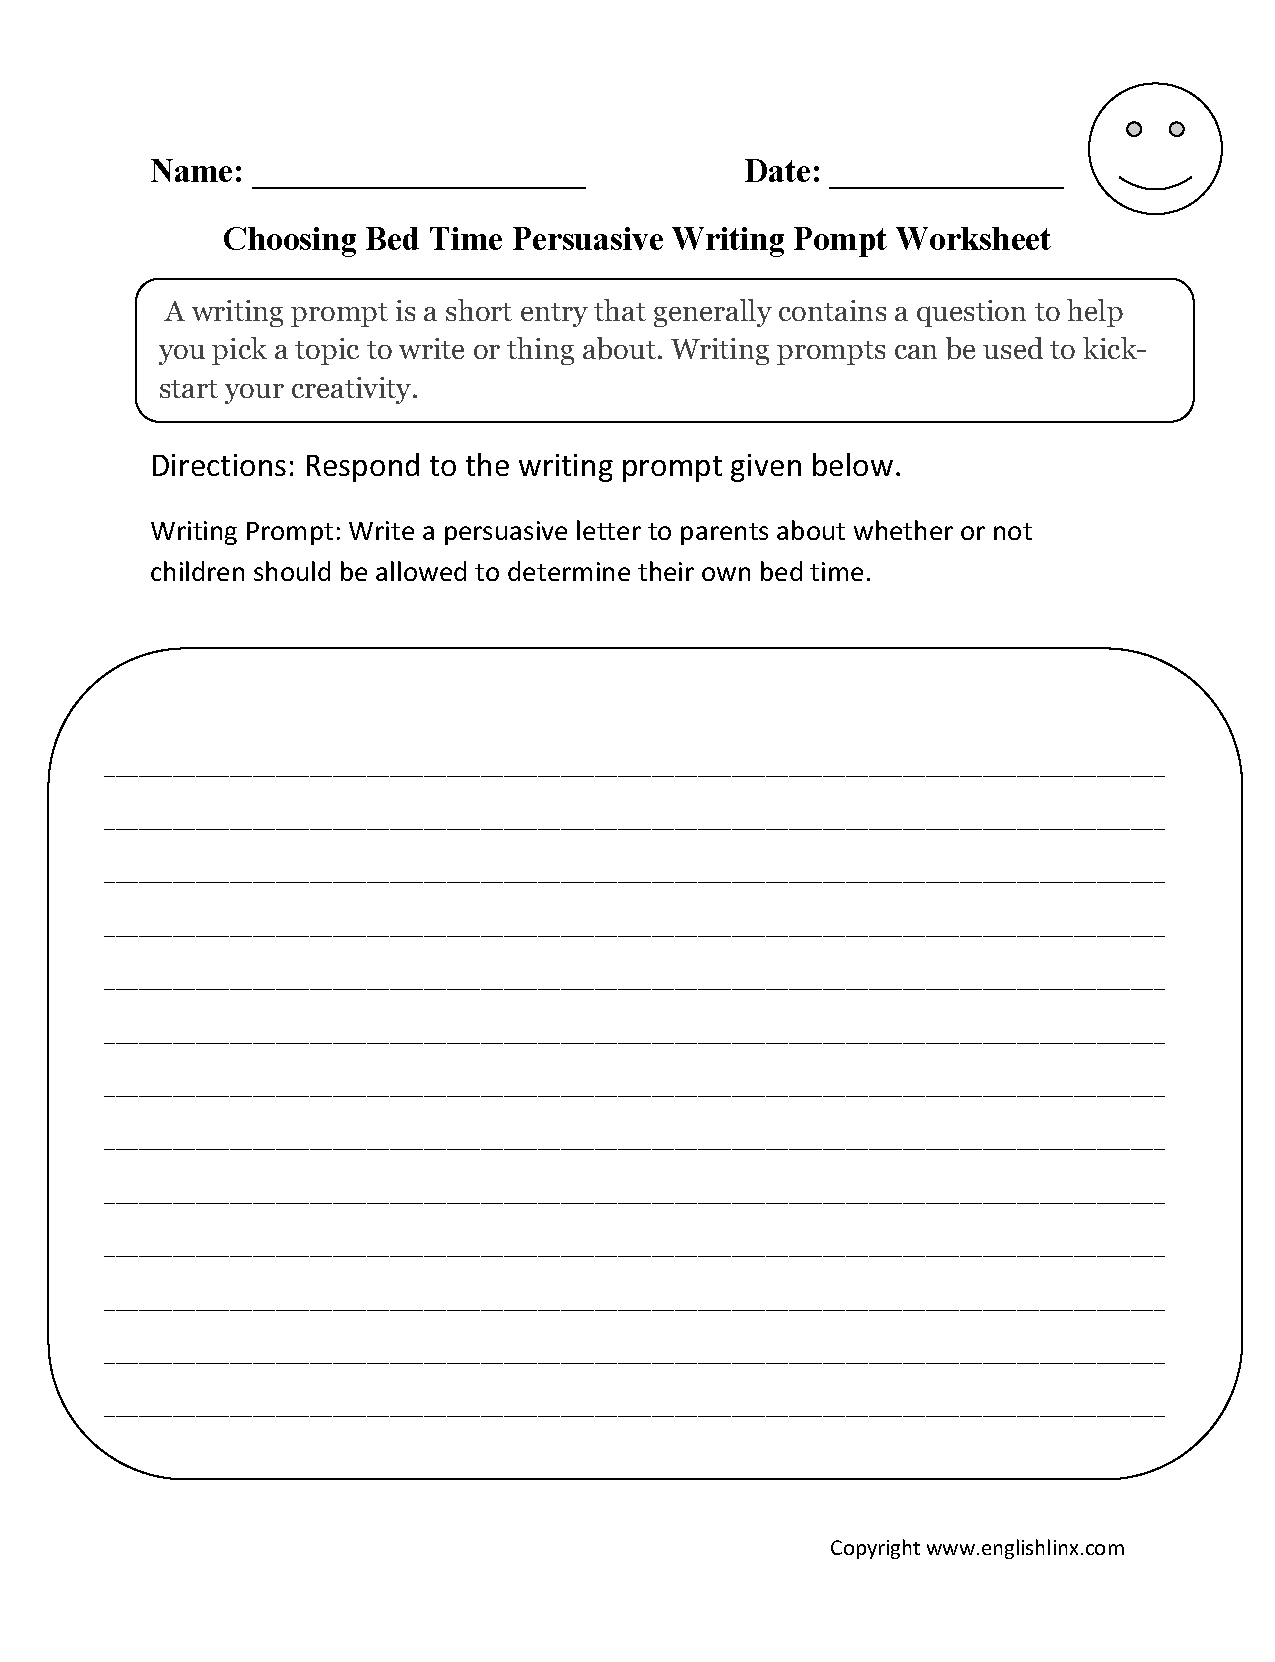 Writing Prompts Worksheets Persuasive Writing Prompts Worksheets